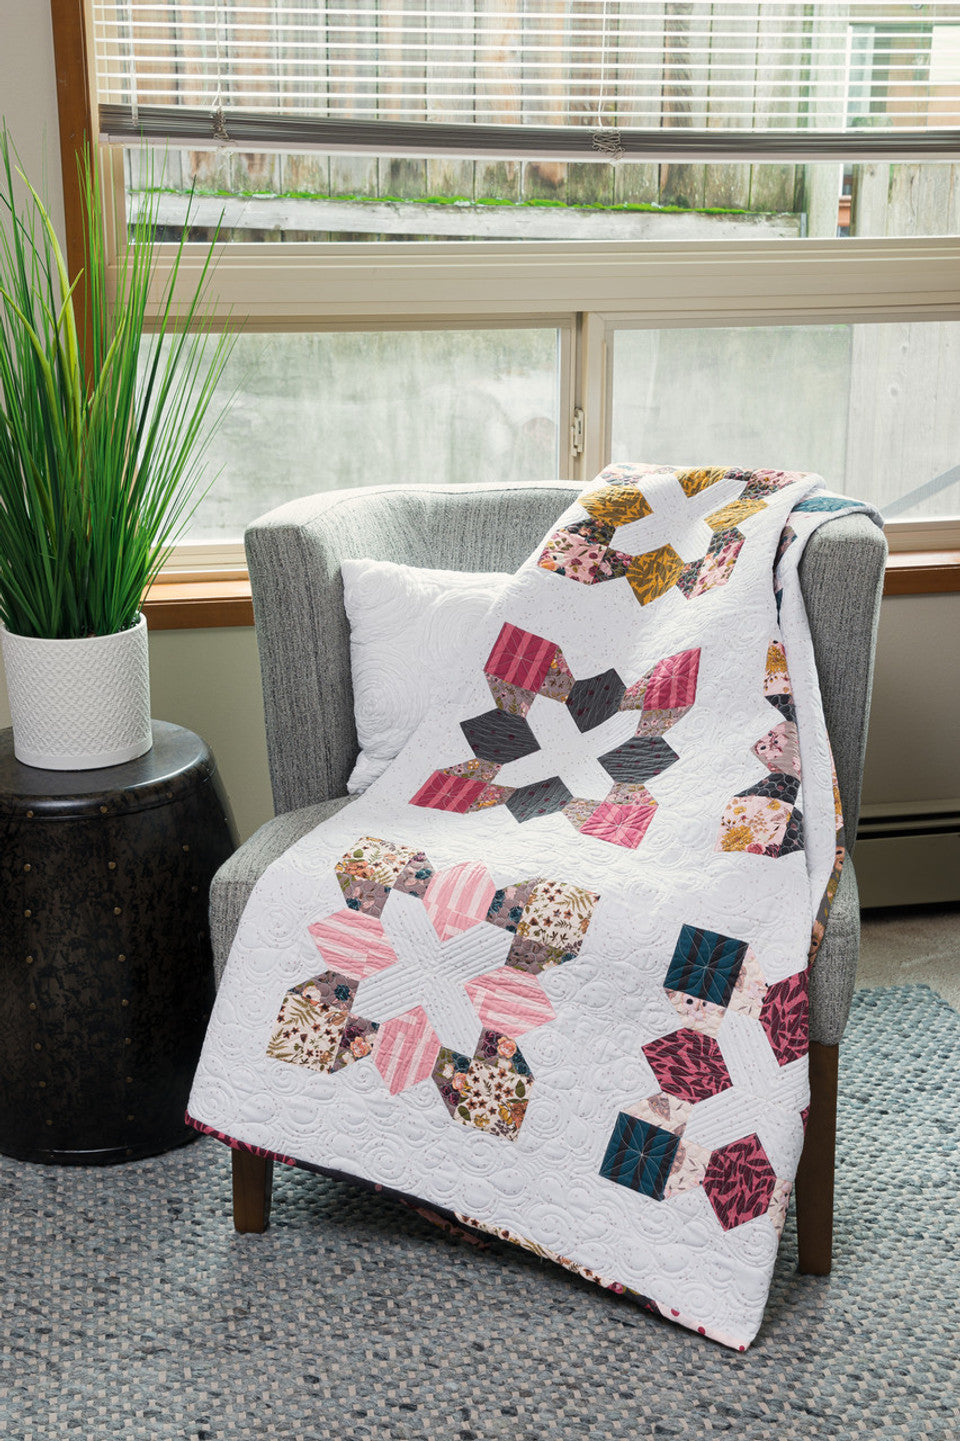 Fast & Fun Lap Quilts Book by Melissa Corry